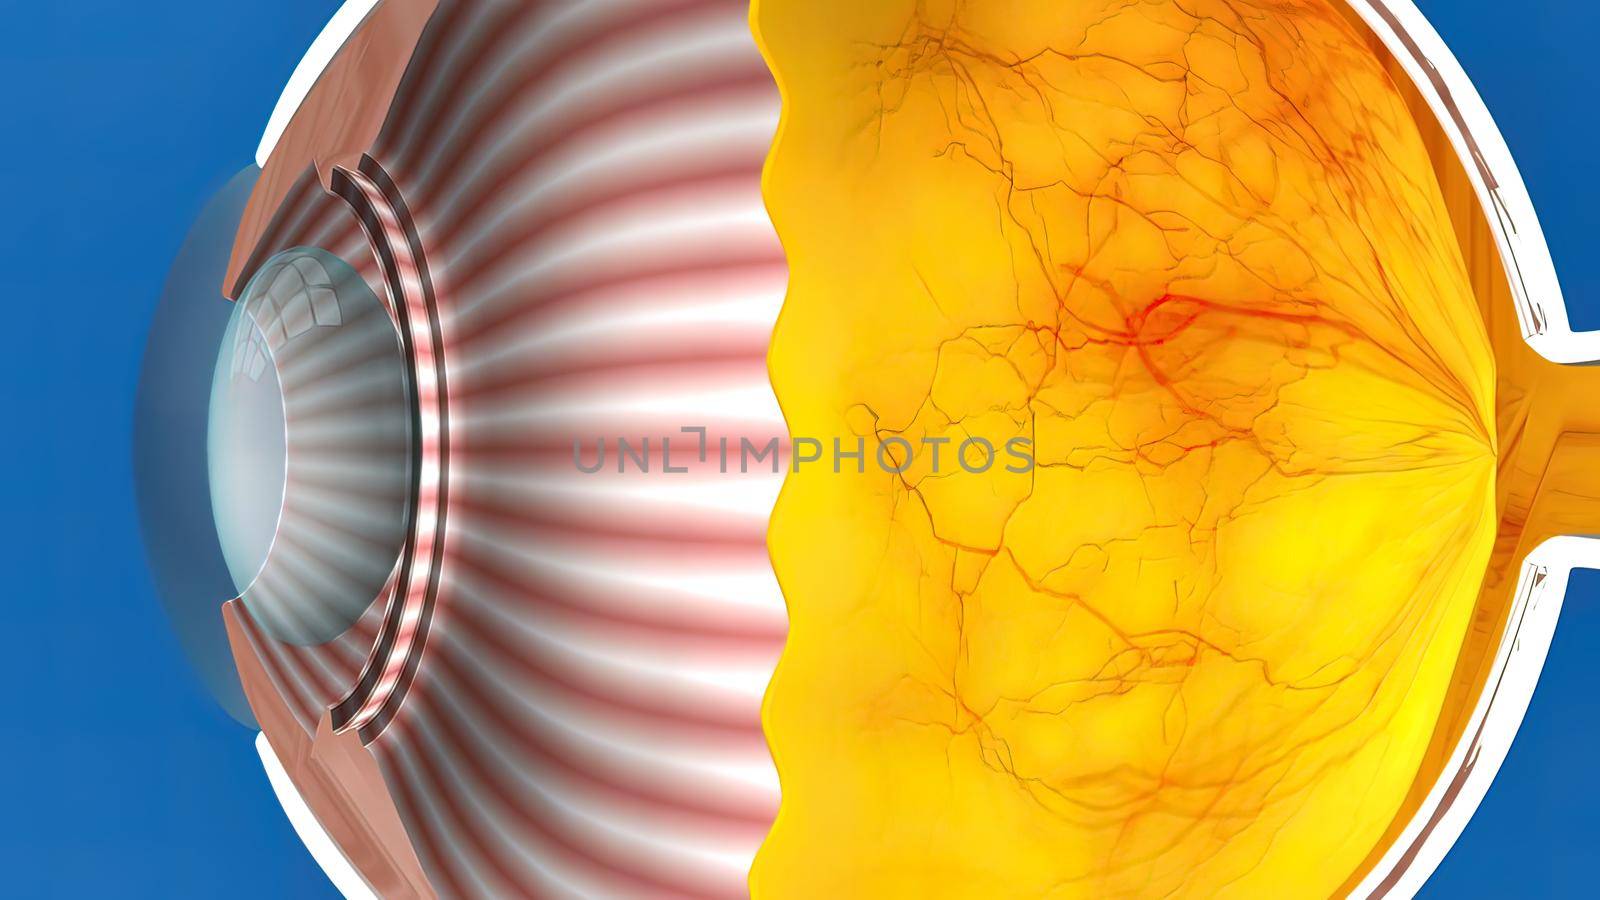 Low-tension or normal-pressure glaucoma. In normal-tension glaucoma the optic nerve is damaged even though the pressure in the eye is not very high. 3d illustration